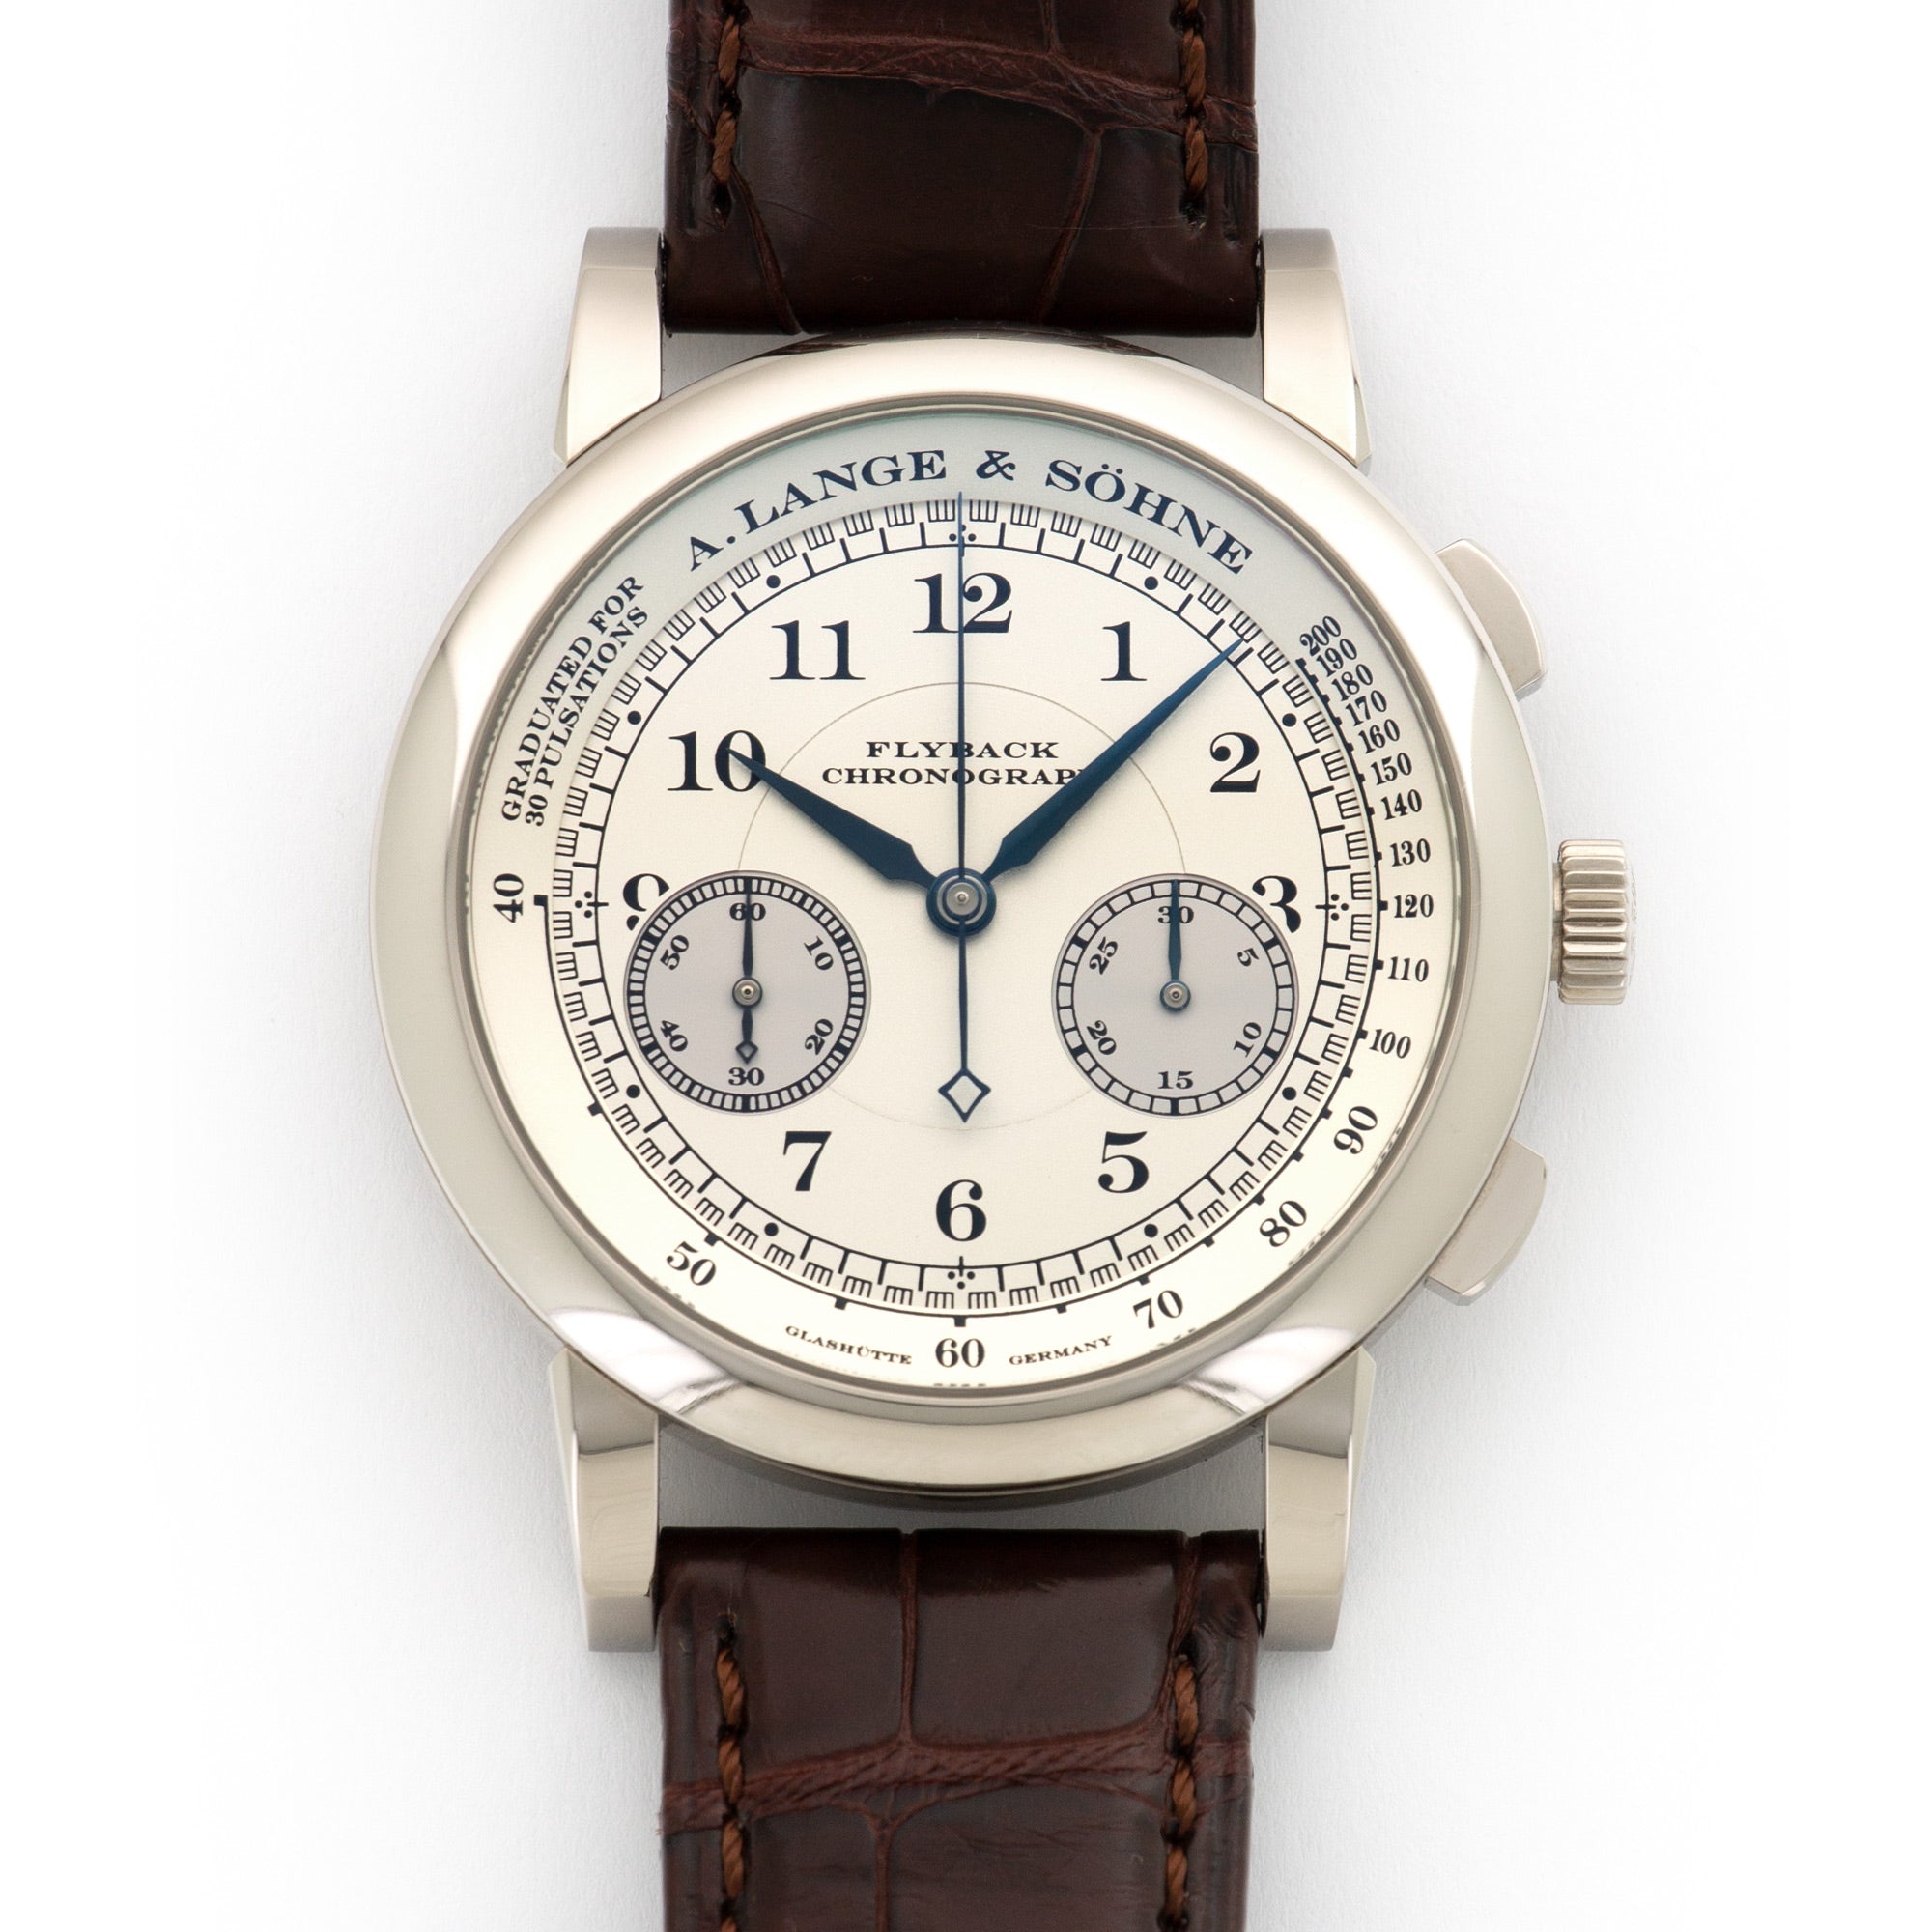 A. Lange & Sohne - A Lange & Sohne 1815 Chronograph White Gold - The Keystone Watches